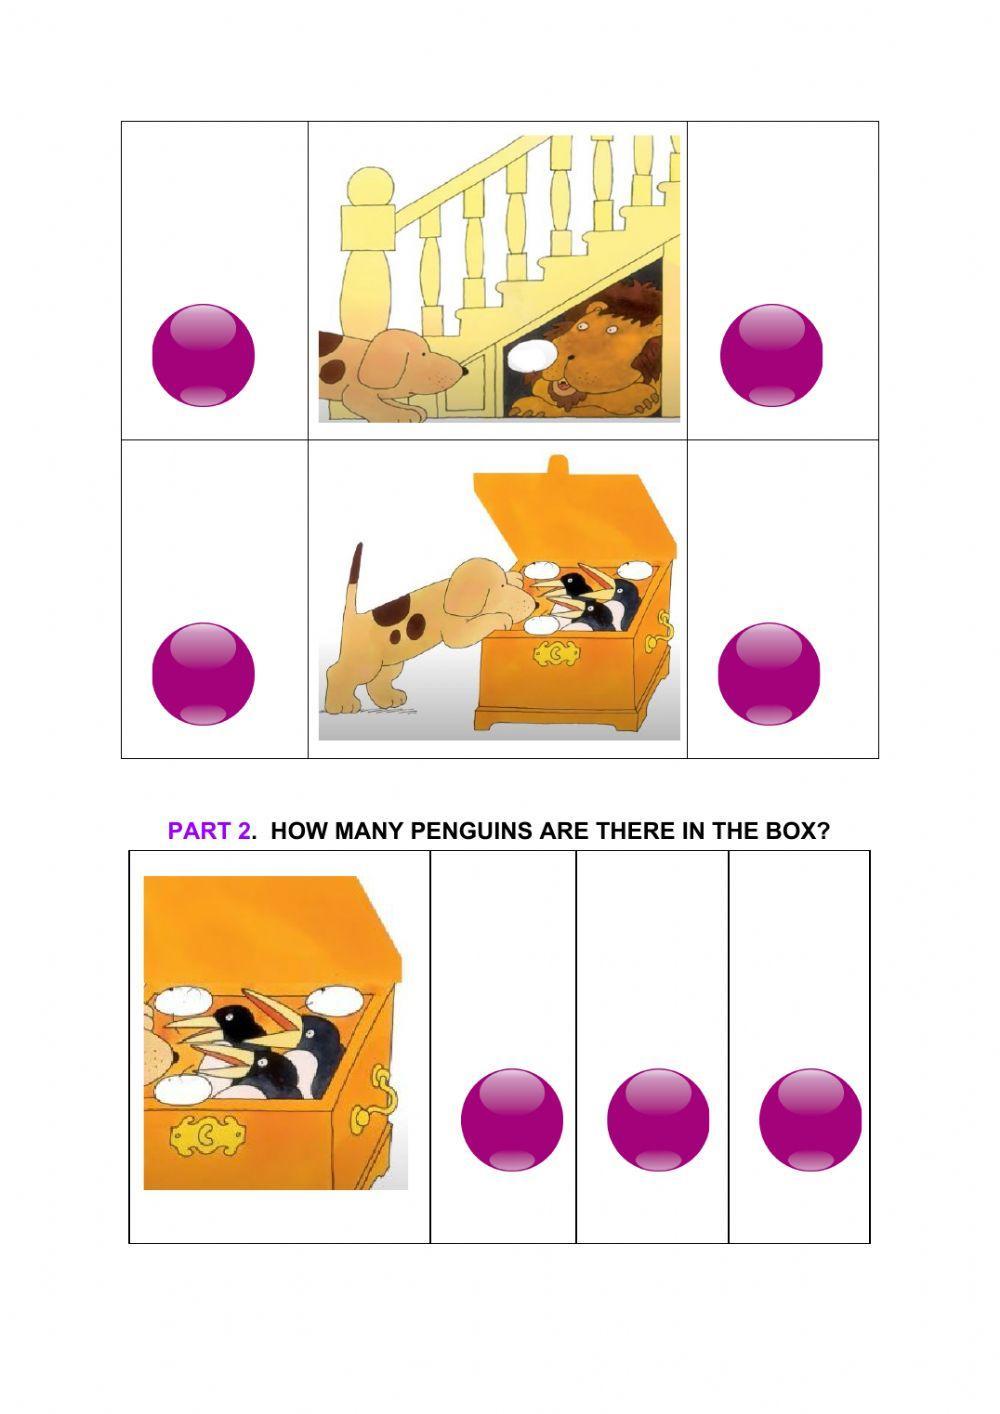 Where is Spot? Prepositions